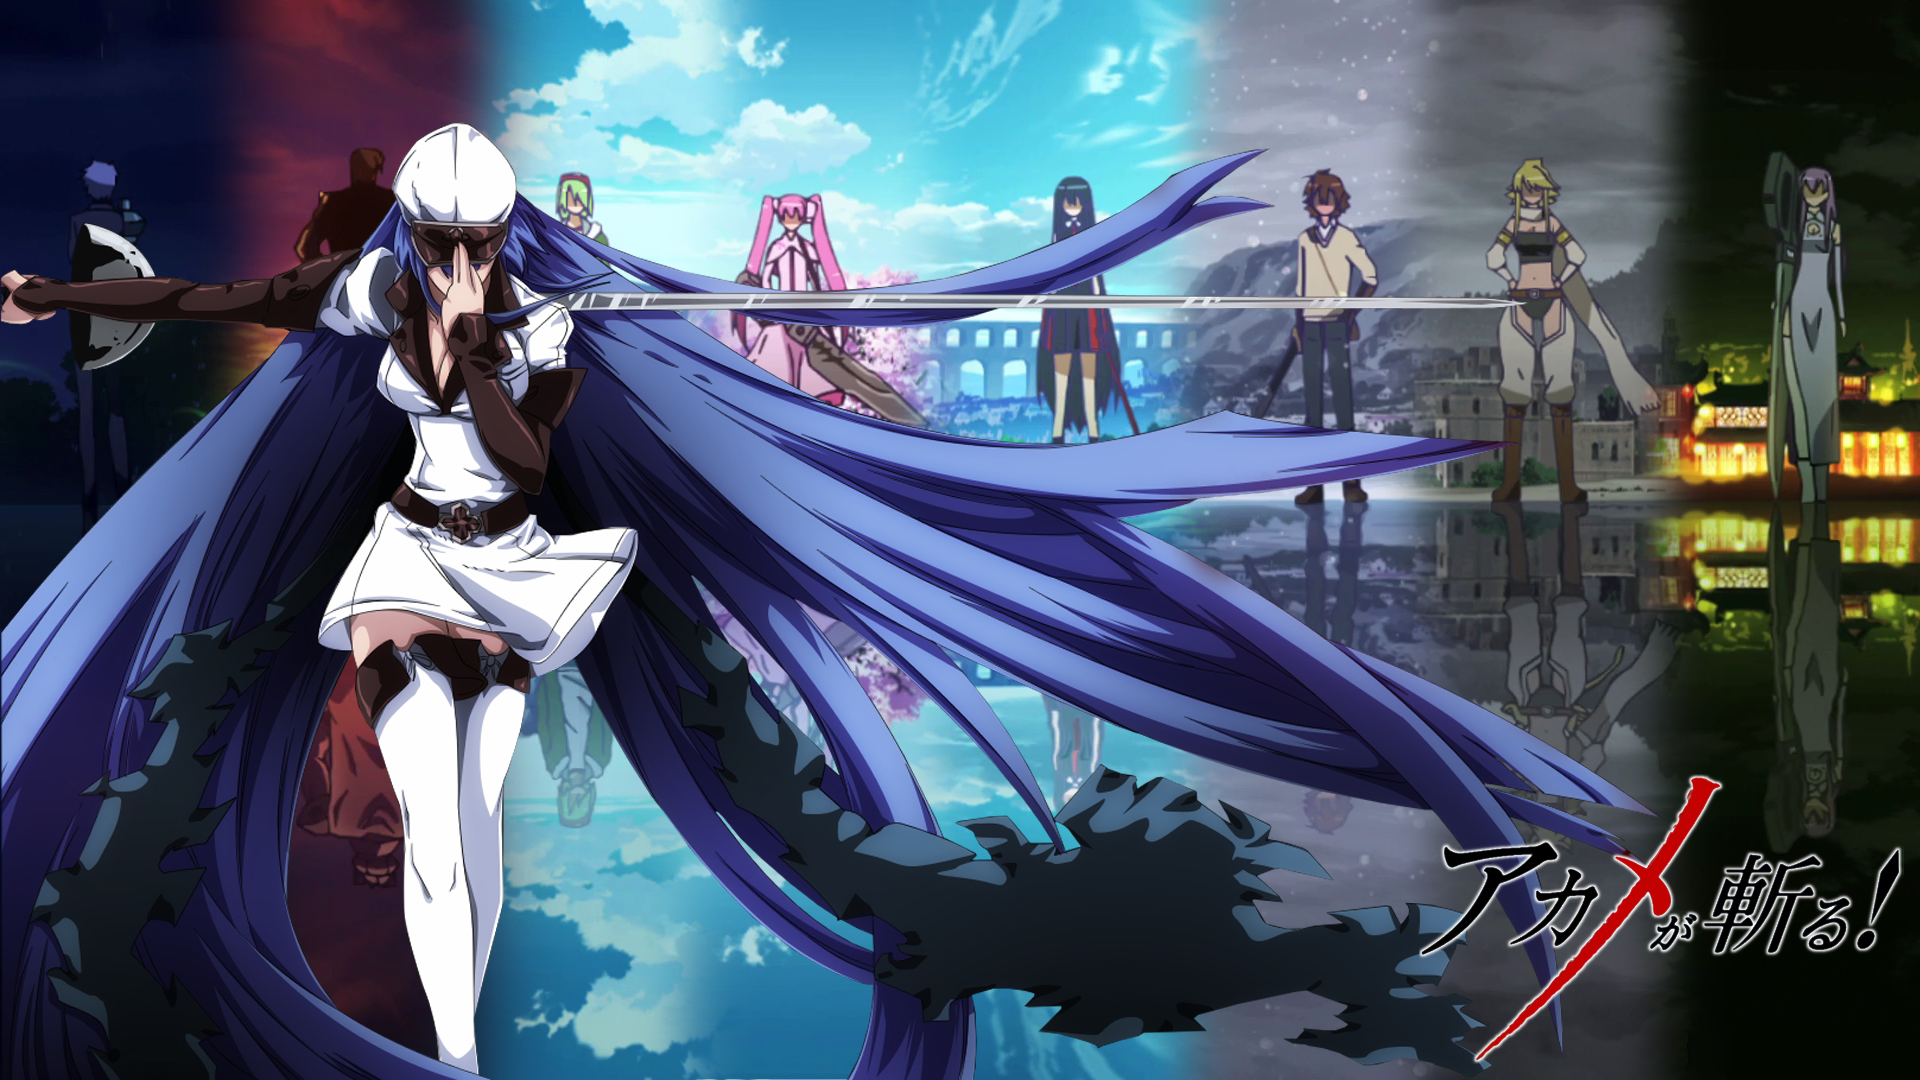 49 esdeath akame ga kill hd wallpapers background images wallpaper abyss esdeath akame ga kill hd wallpapers